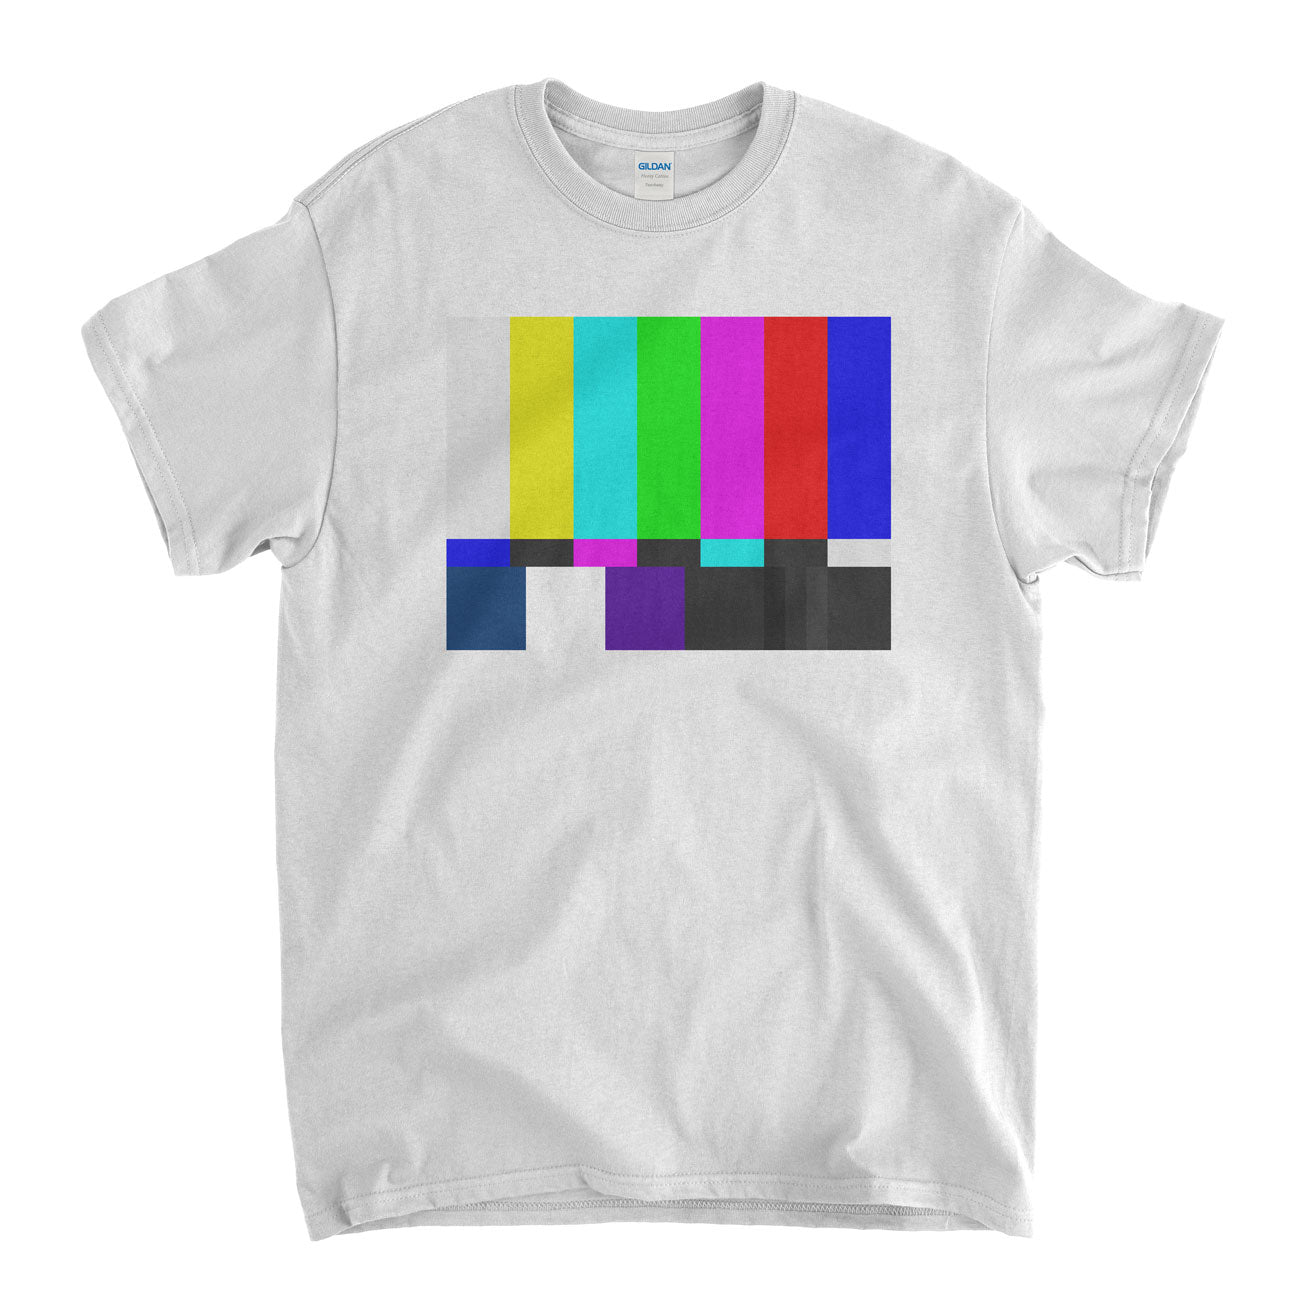 TV Colour Bars T shirt - An Old Skool Hooligans TV Classic As Worn In The Big Bang Theory